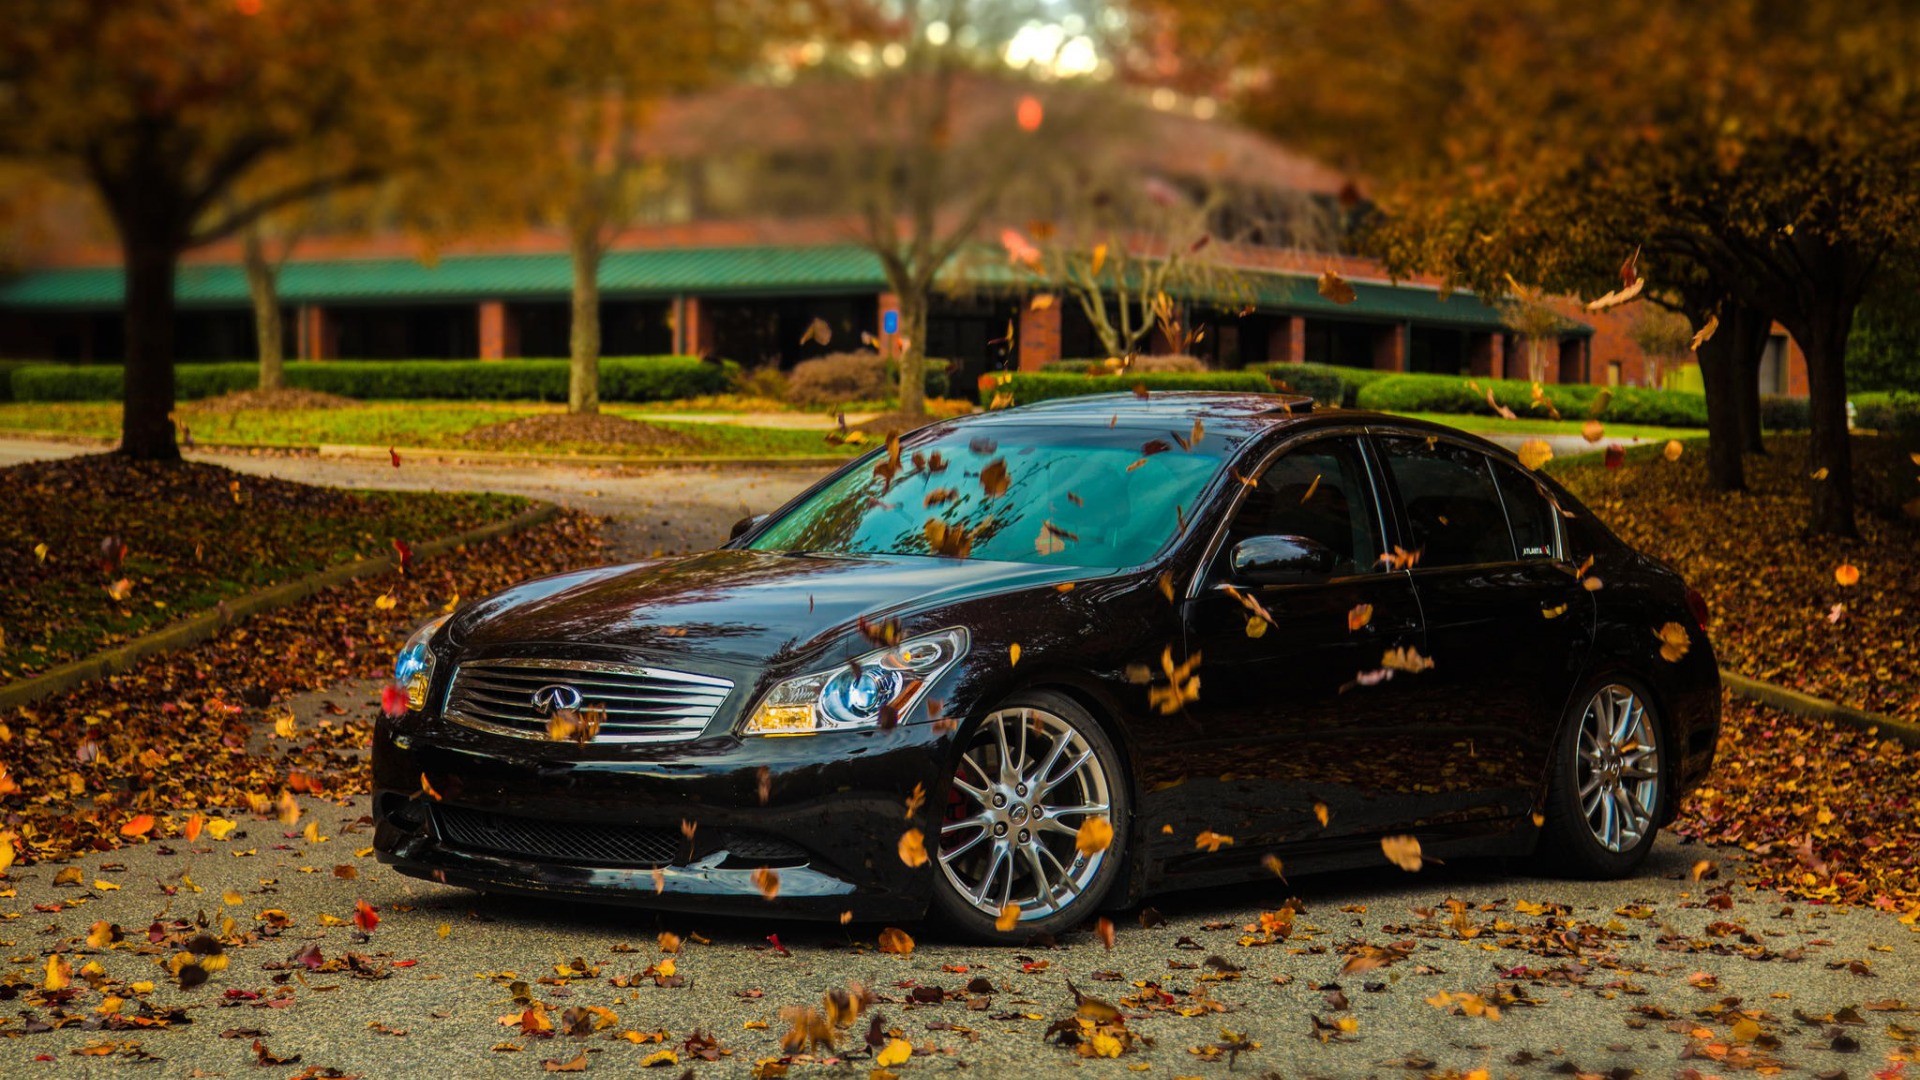 Infiniti car in autumn park wallpaper and image, picture, photo